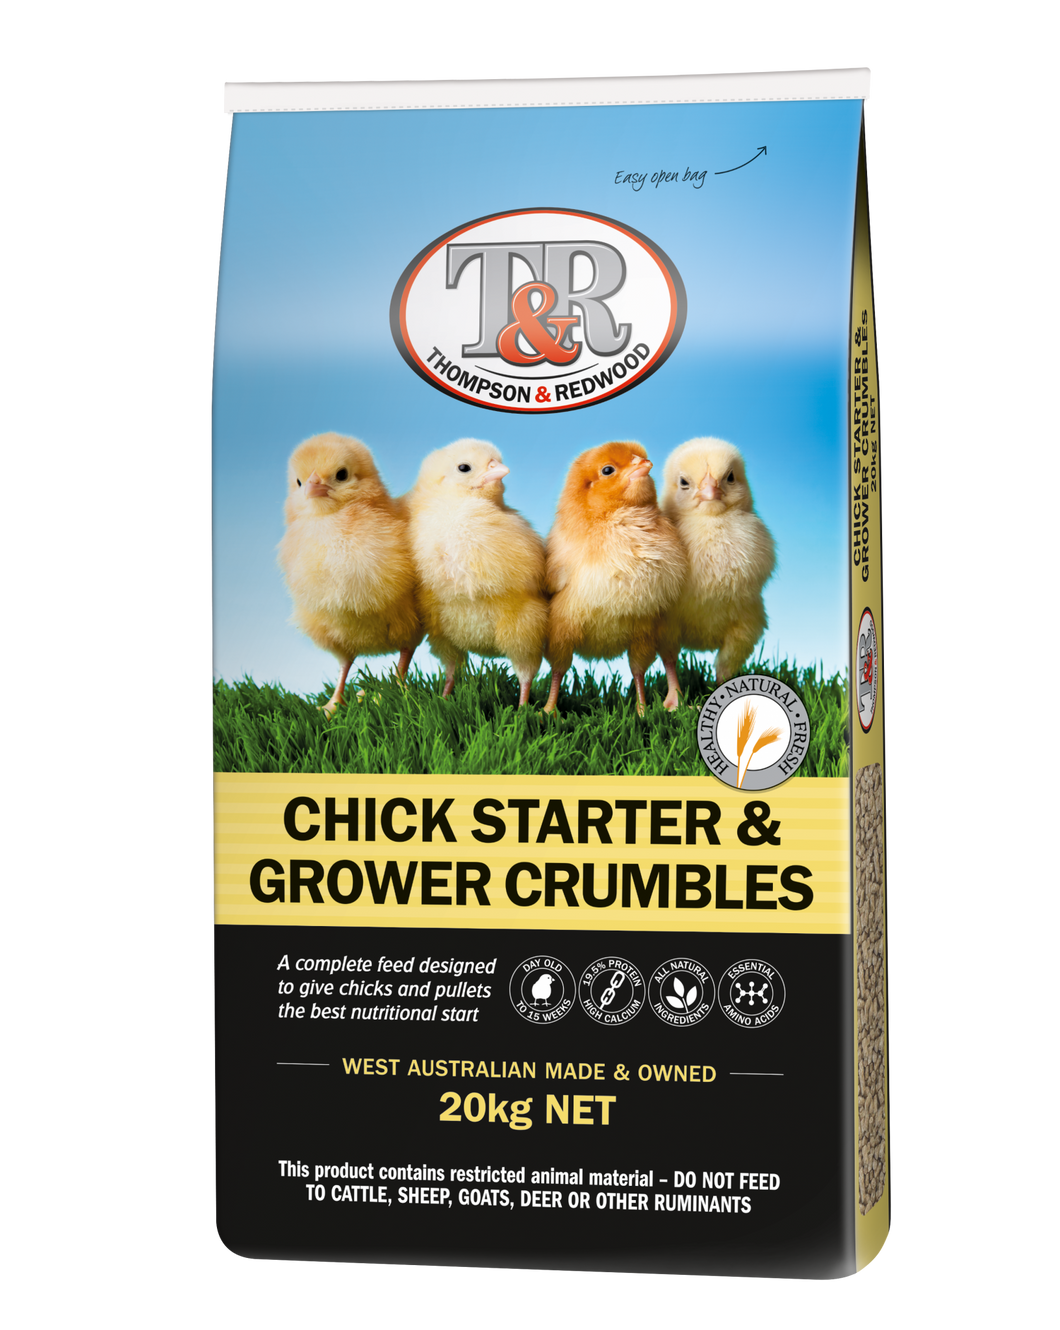 OH - T & R Chick Starter & Grower Crumbles 20kg